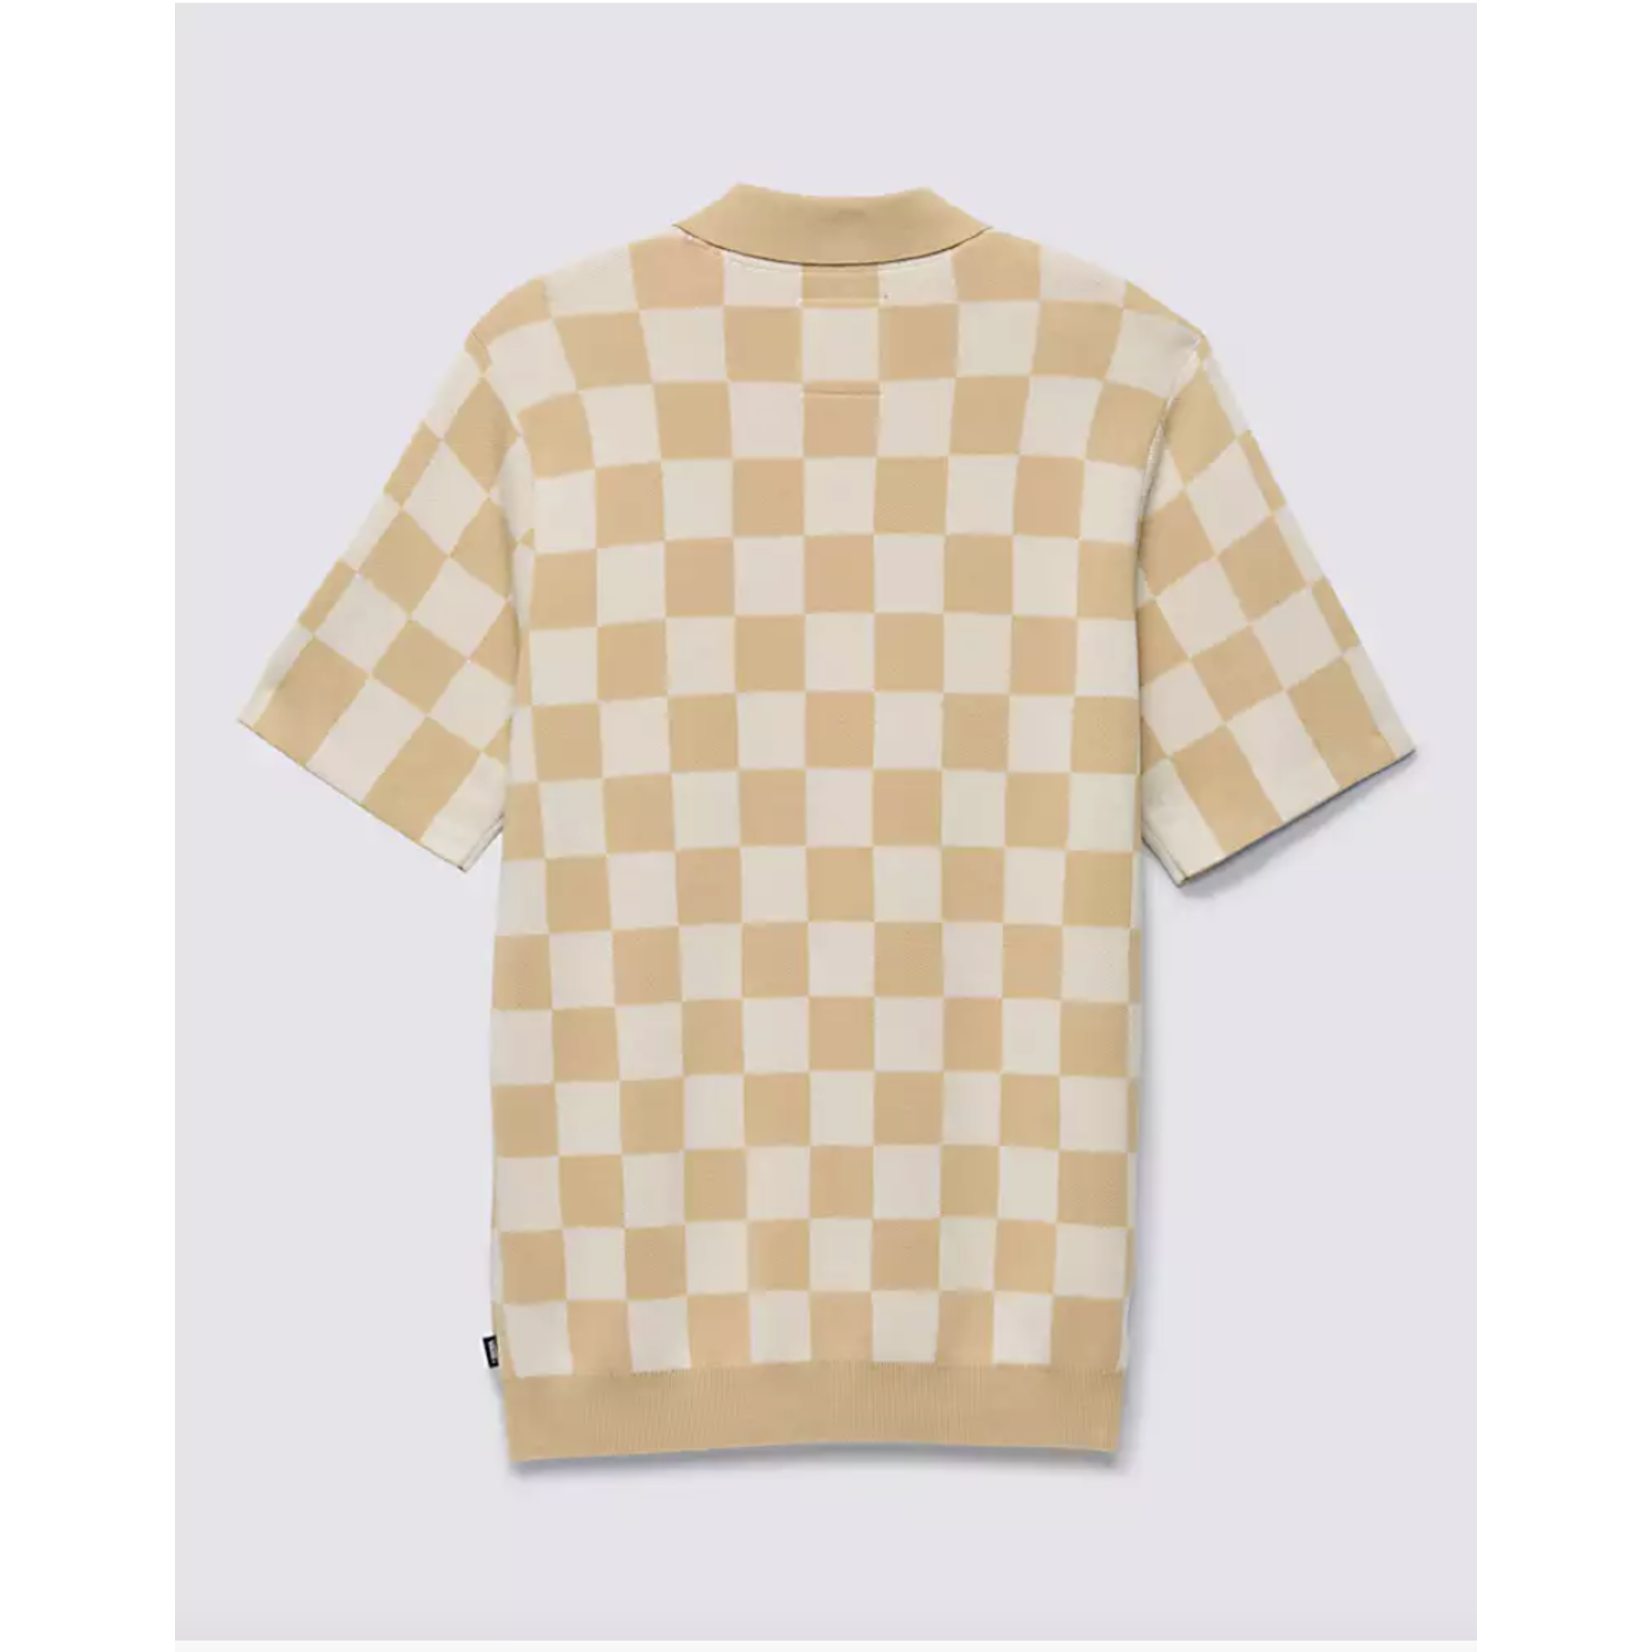 VANS CHECKBOARD SS SWEATER POLO